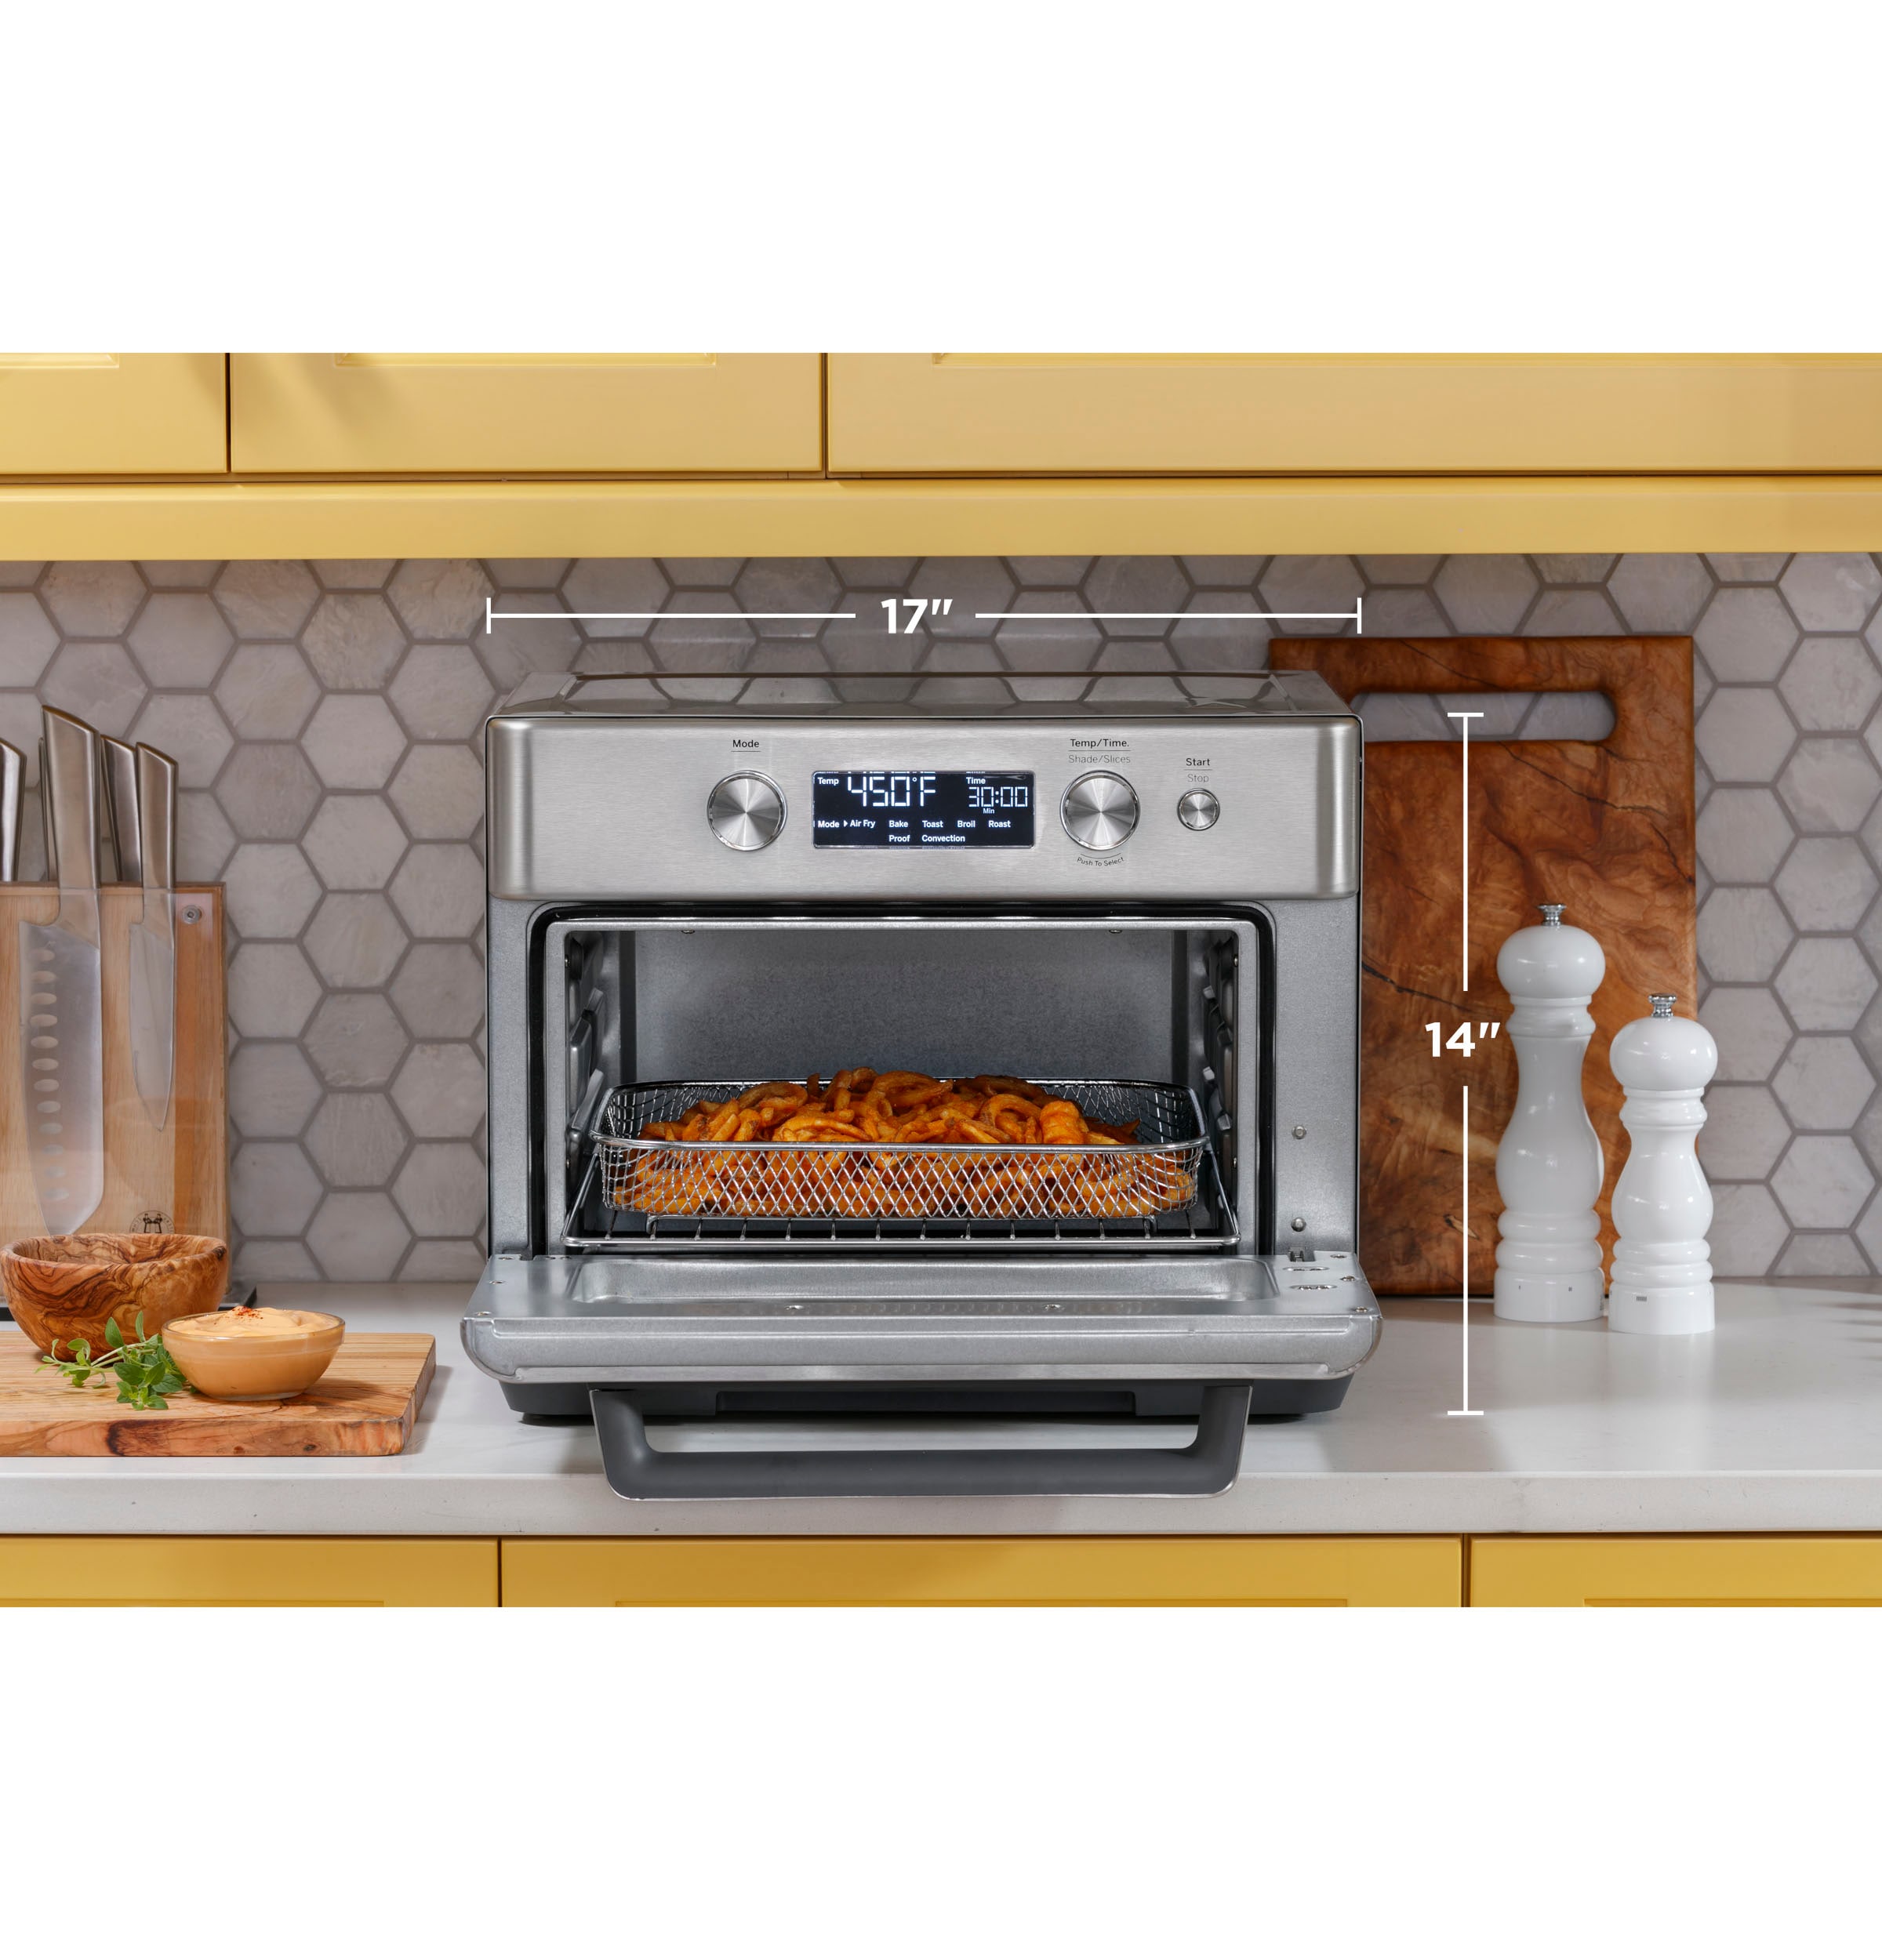  GE Digital Air Fryer Toaster Oven + Accessory Set, Convection  Toaster with 8 Cook Modes, Large Capacity Oven - Fits 12 Pizza, Countertop Kitchen Essentials